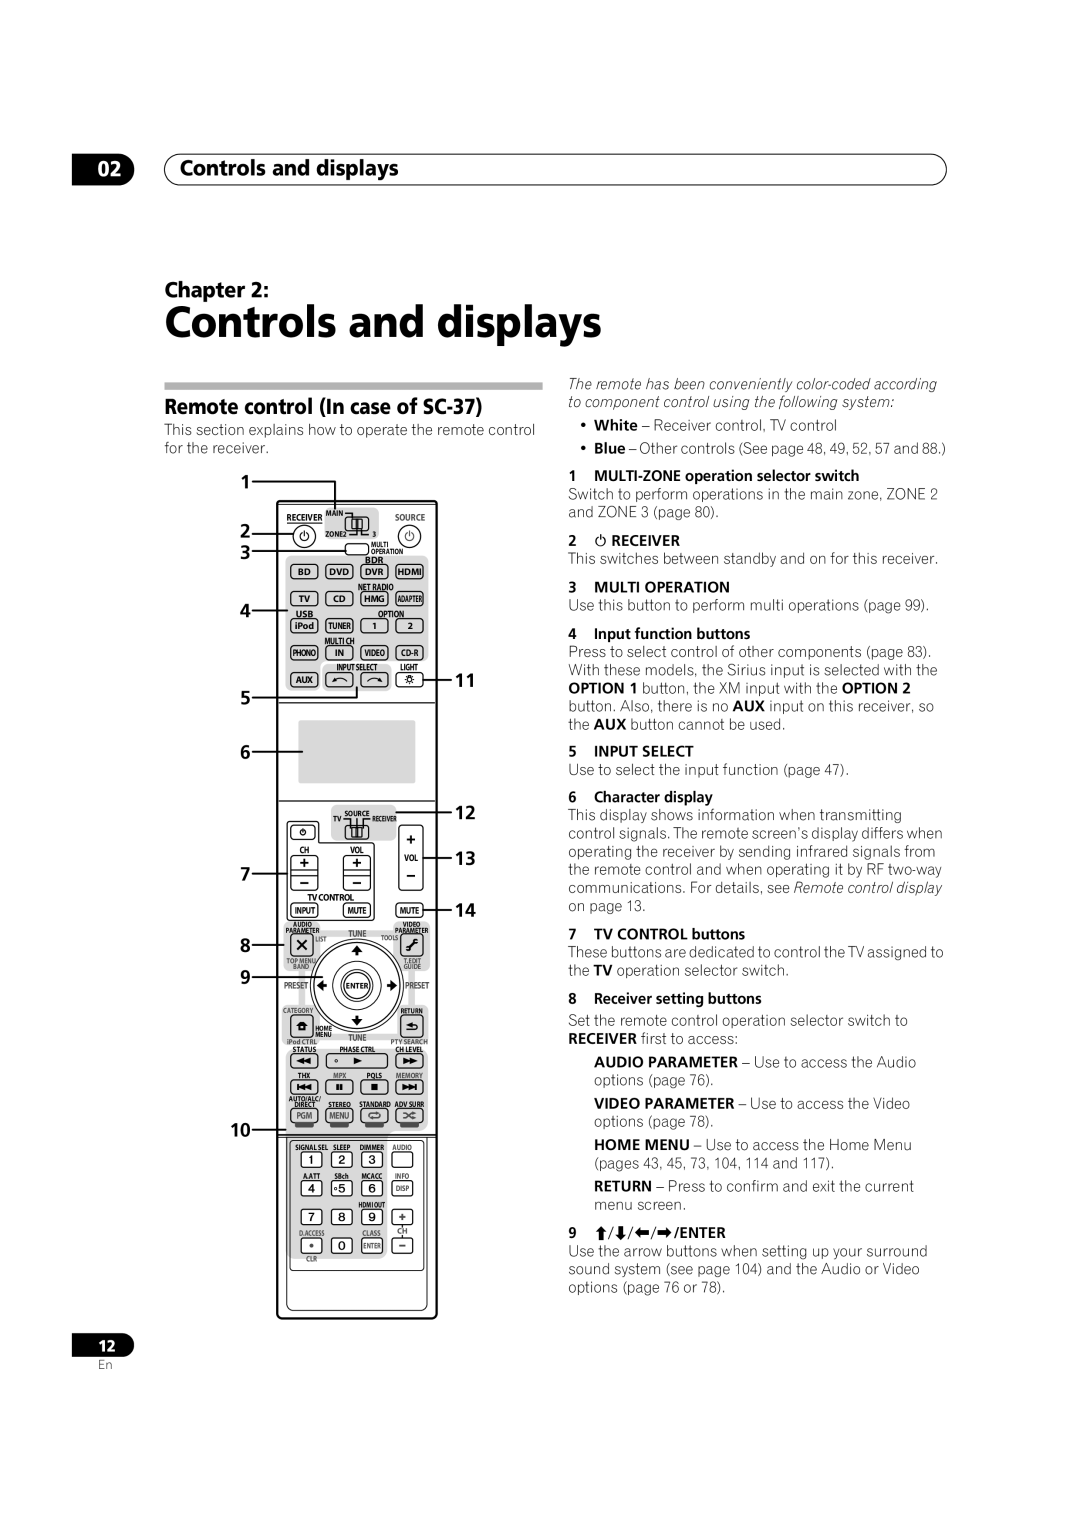 Pioneer SC-35 manual 02Controls and displays Chapter, Remote control In case of SC-37 